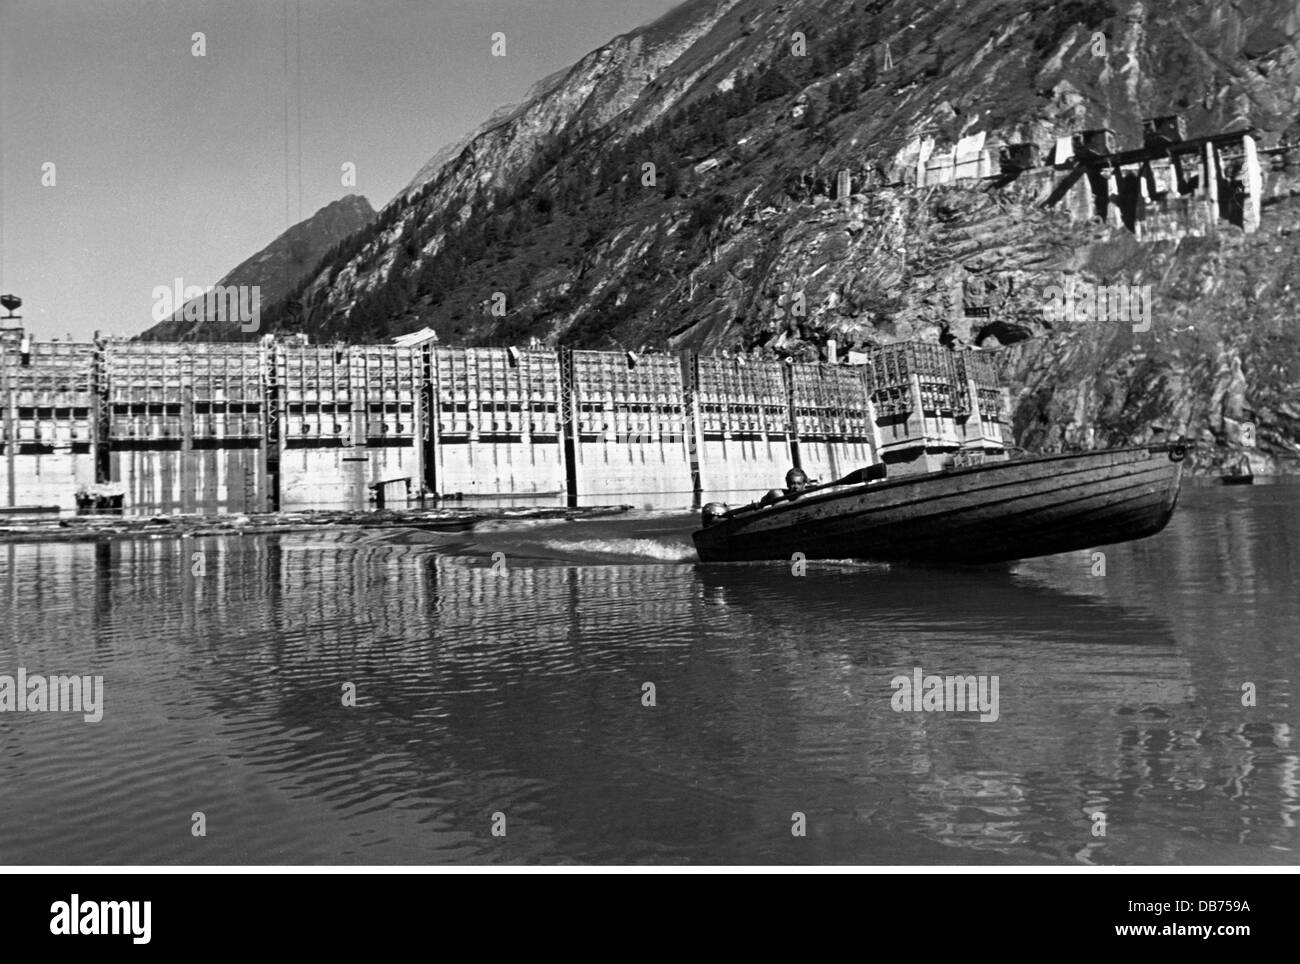 energy, water, Limberg dam of the Kaprun power station during construction, man in boat on dam lake, Austria, circa 1950, Additional-Rights-Clearences-Not Available Stock Photo